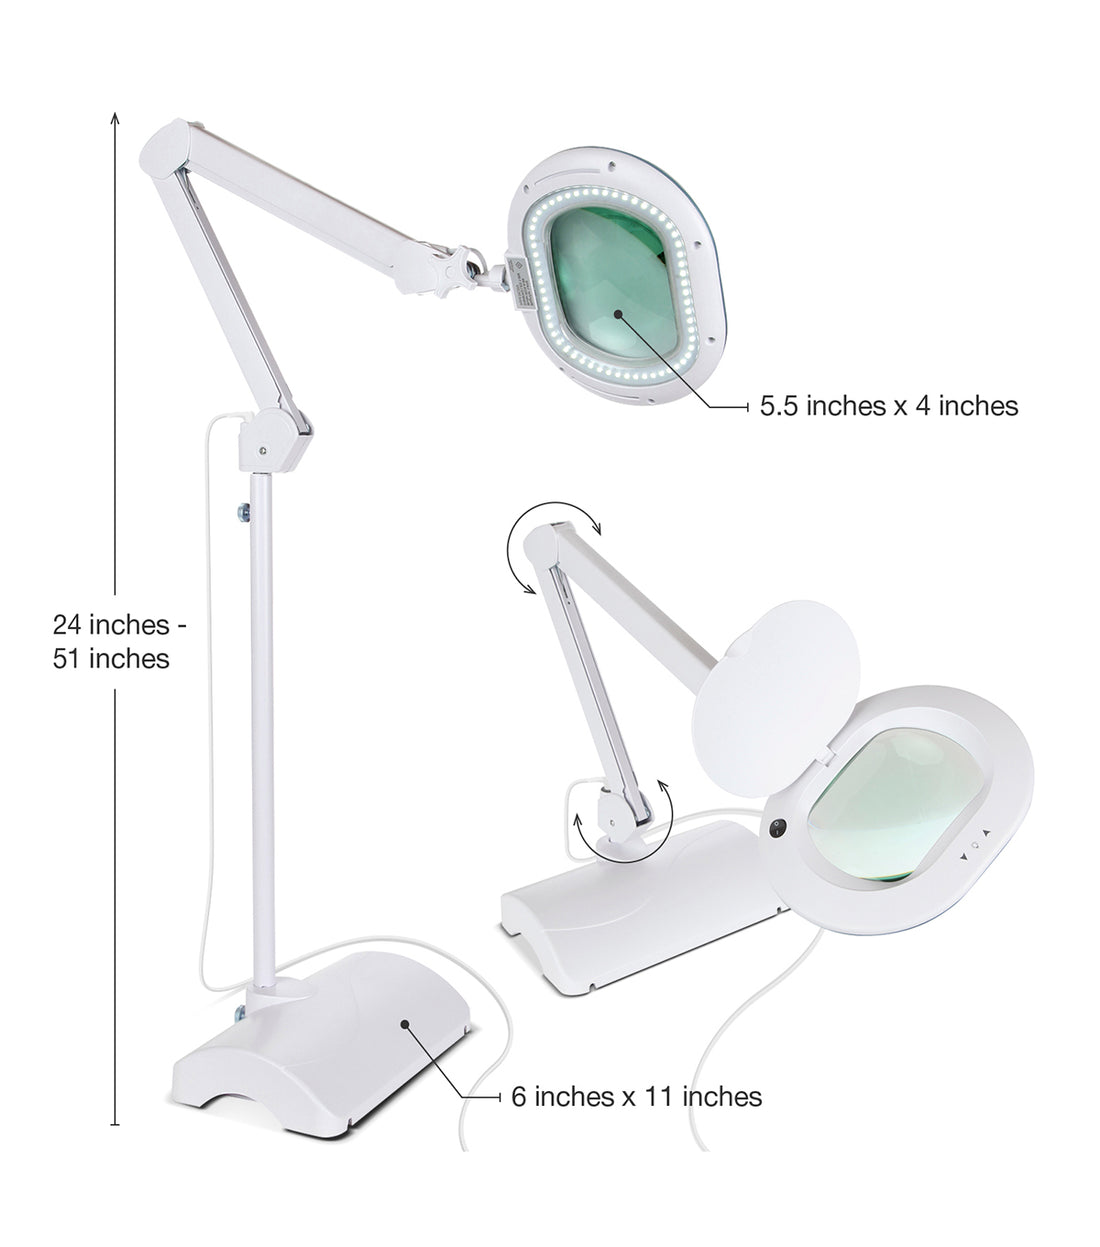 Brightech LightView Pro 3 in 1 Magnifying Lamp - Bright LED Light